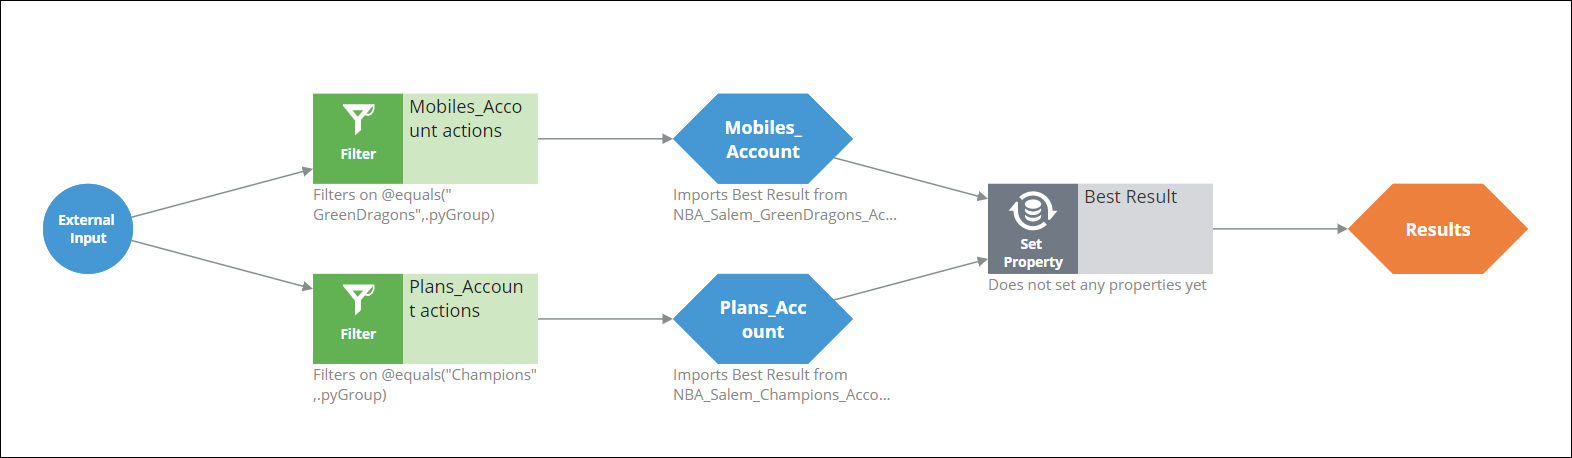 Sample configuration of an issue-level Account context strategy